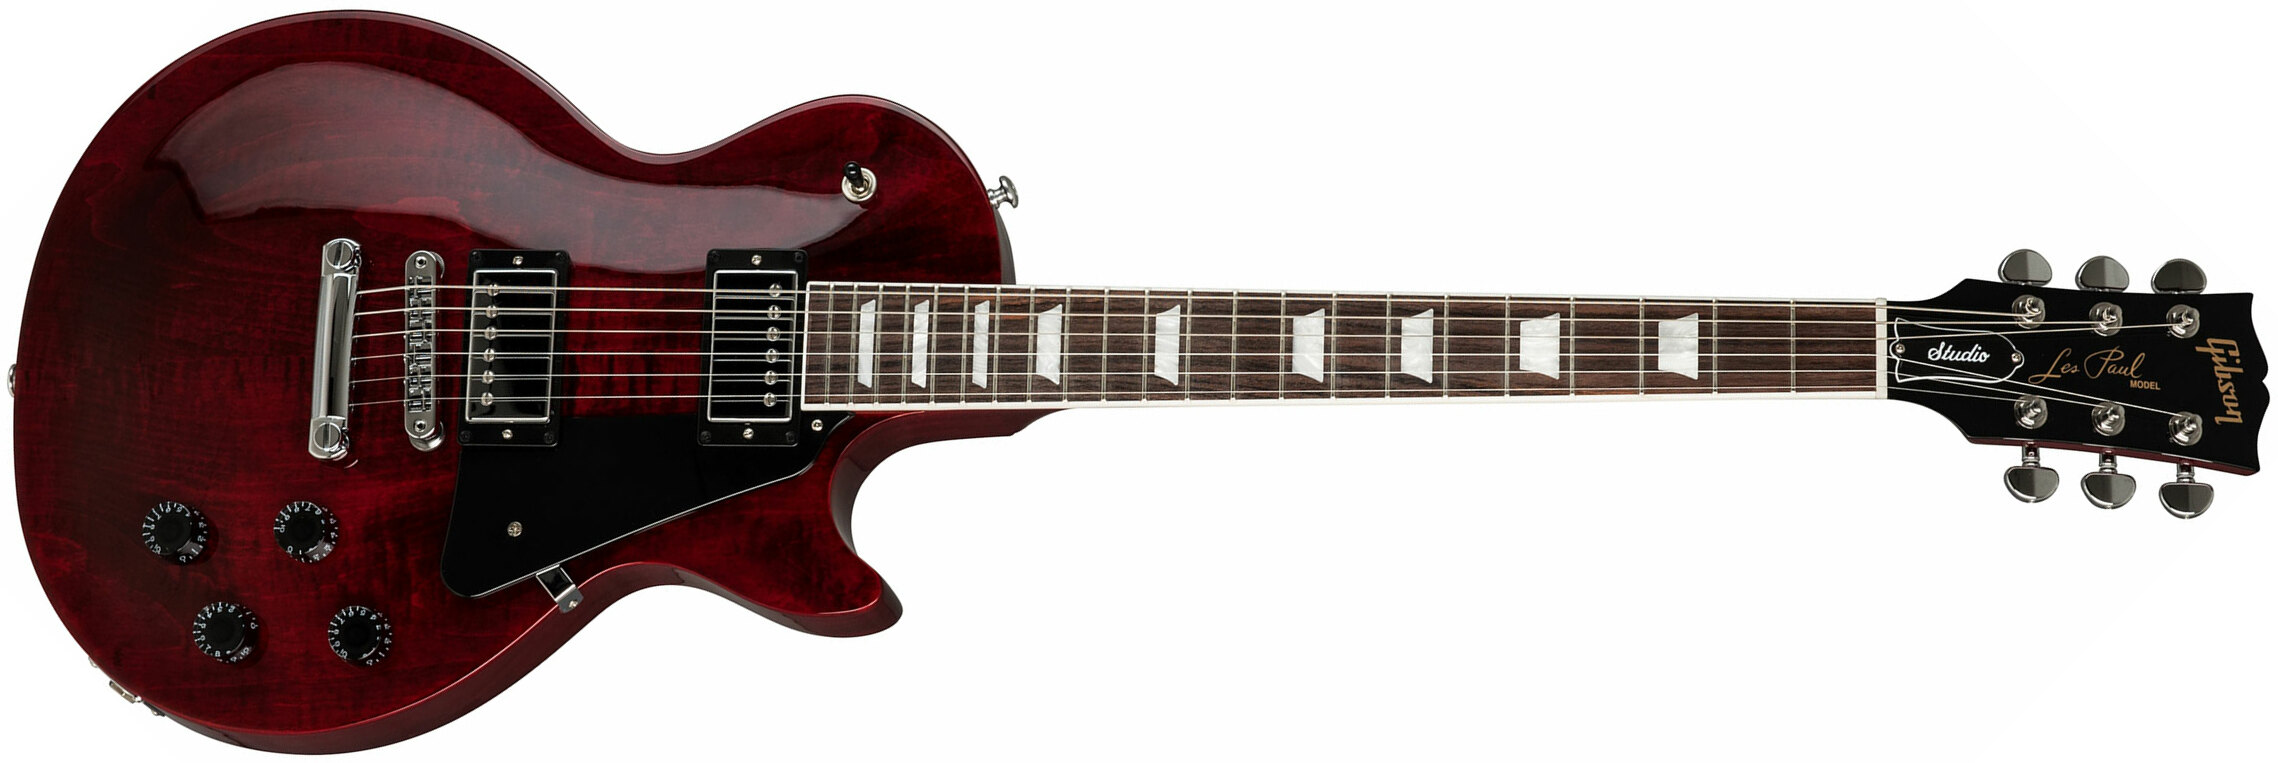 Gibson Les Paul Studio 2019 Hh Ht Rw - Wine Red - Single cut electric guitar - Main picture